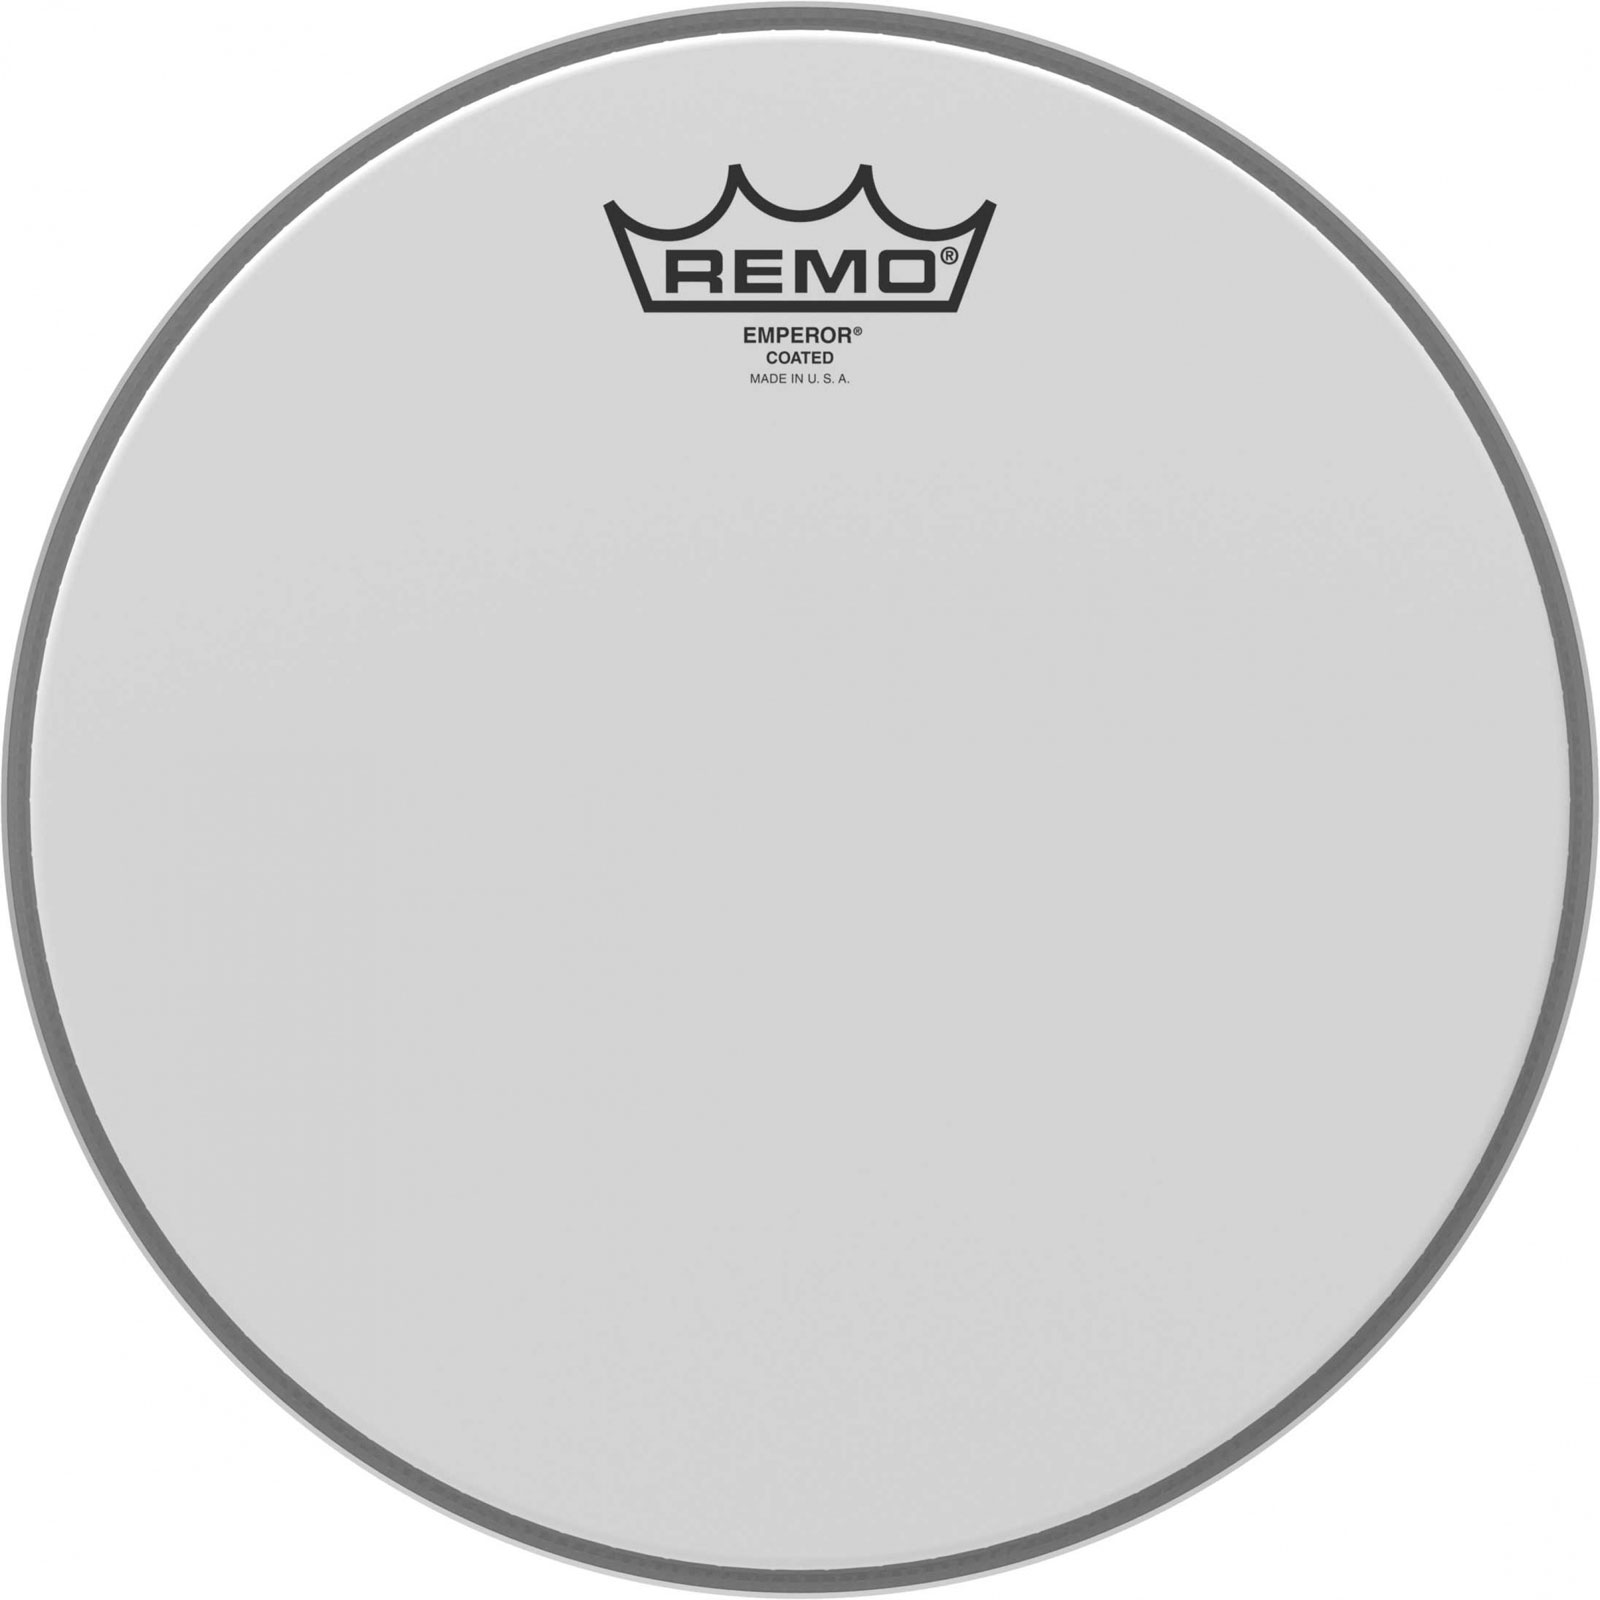 REMO EMPEROR 10 - COATED - BE-0110-00